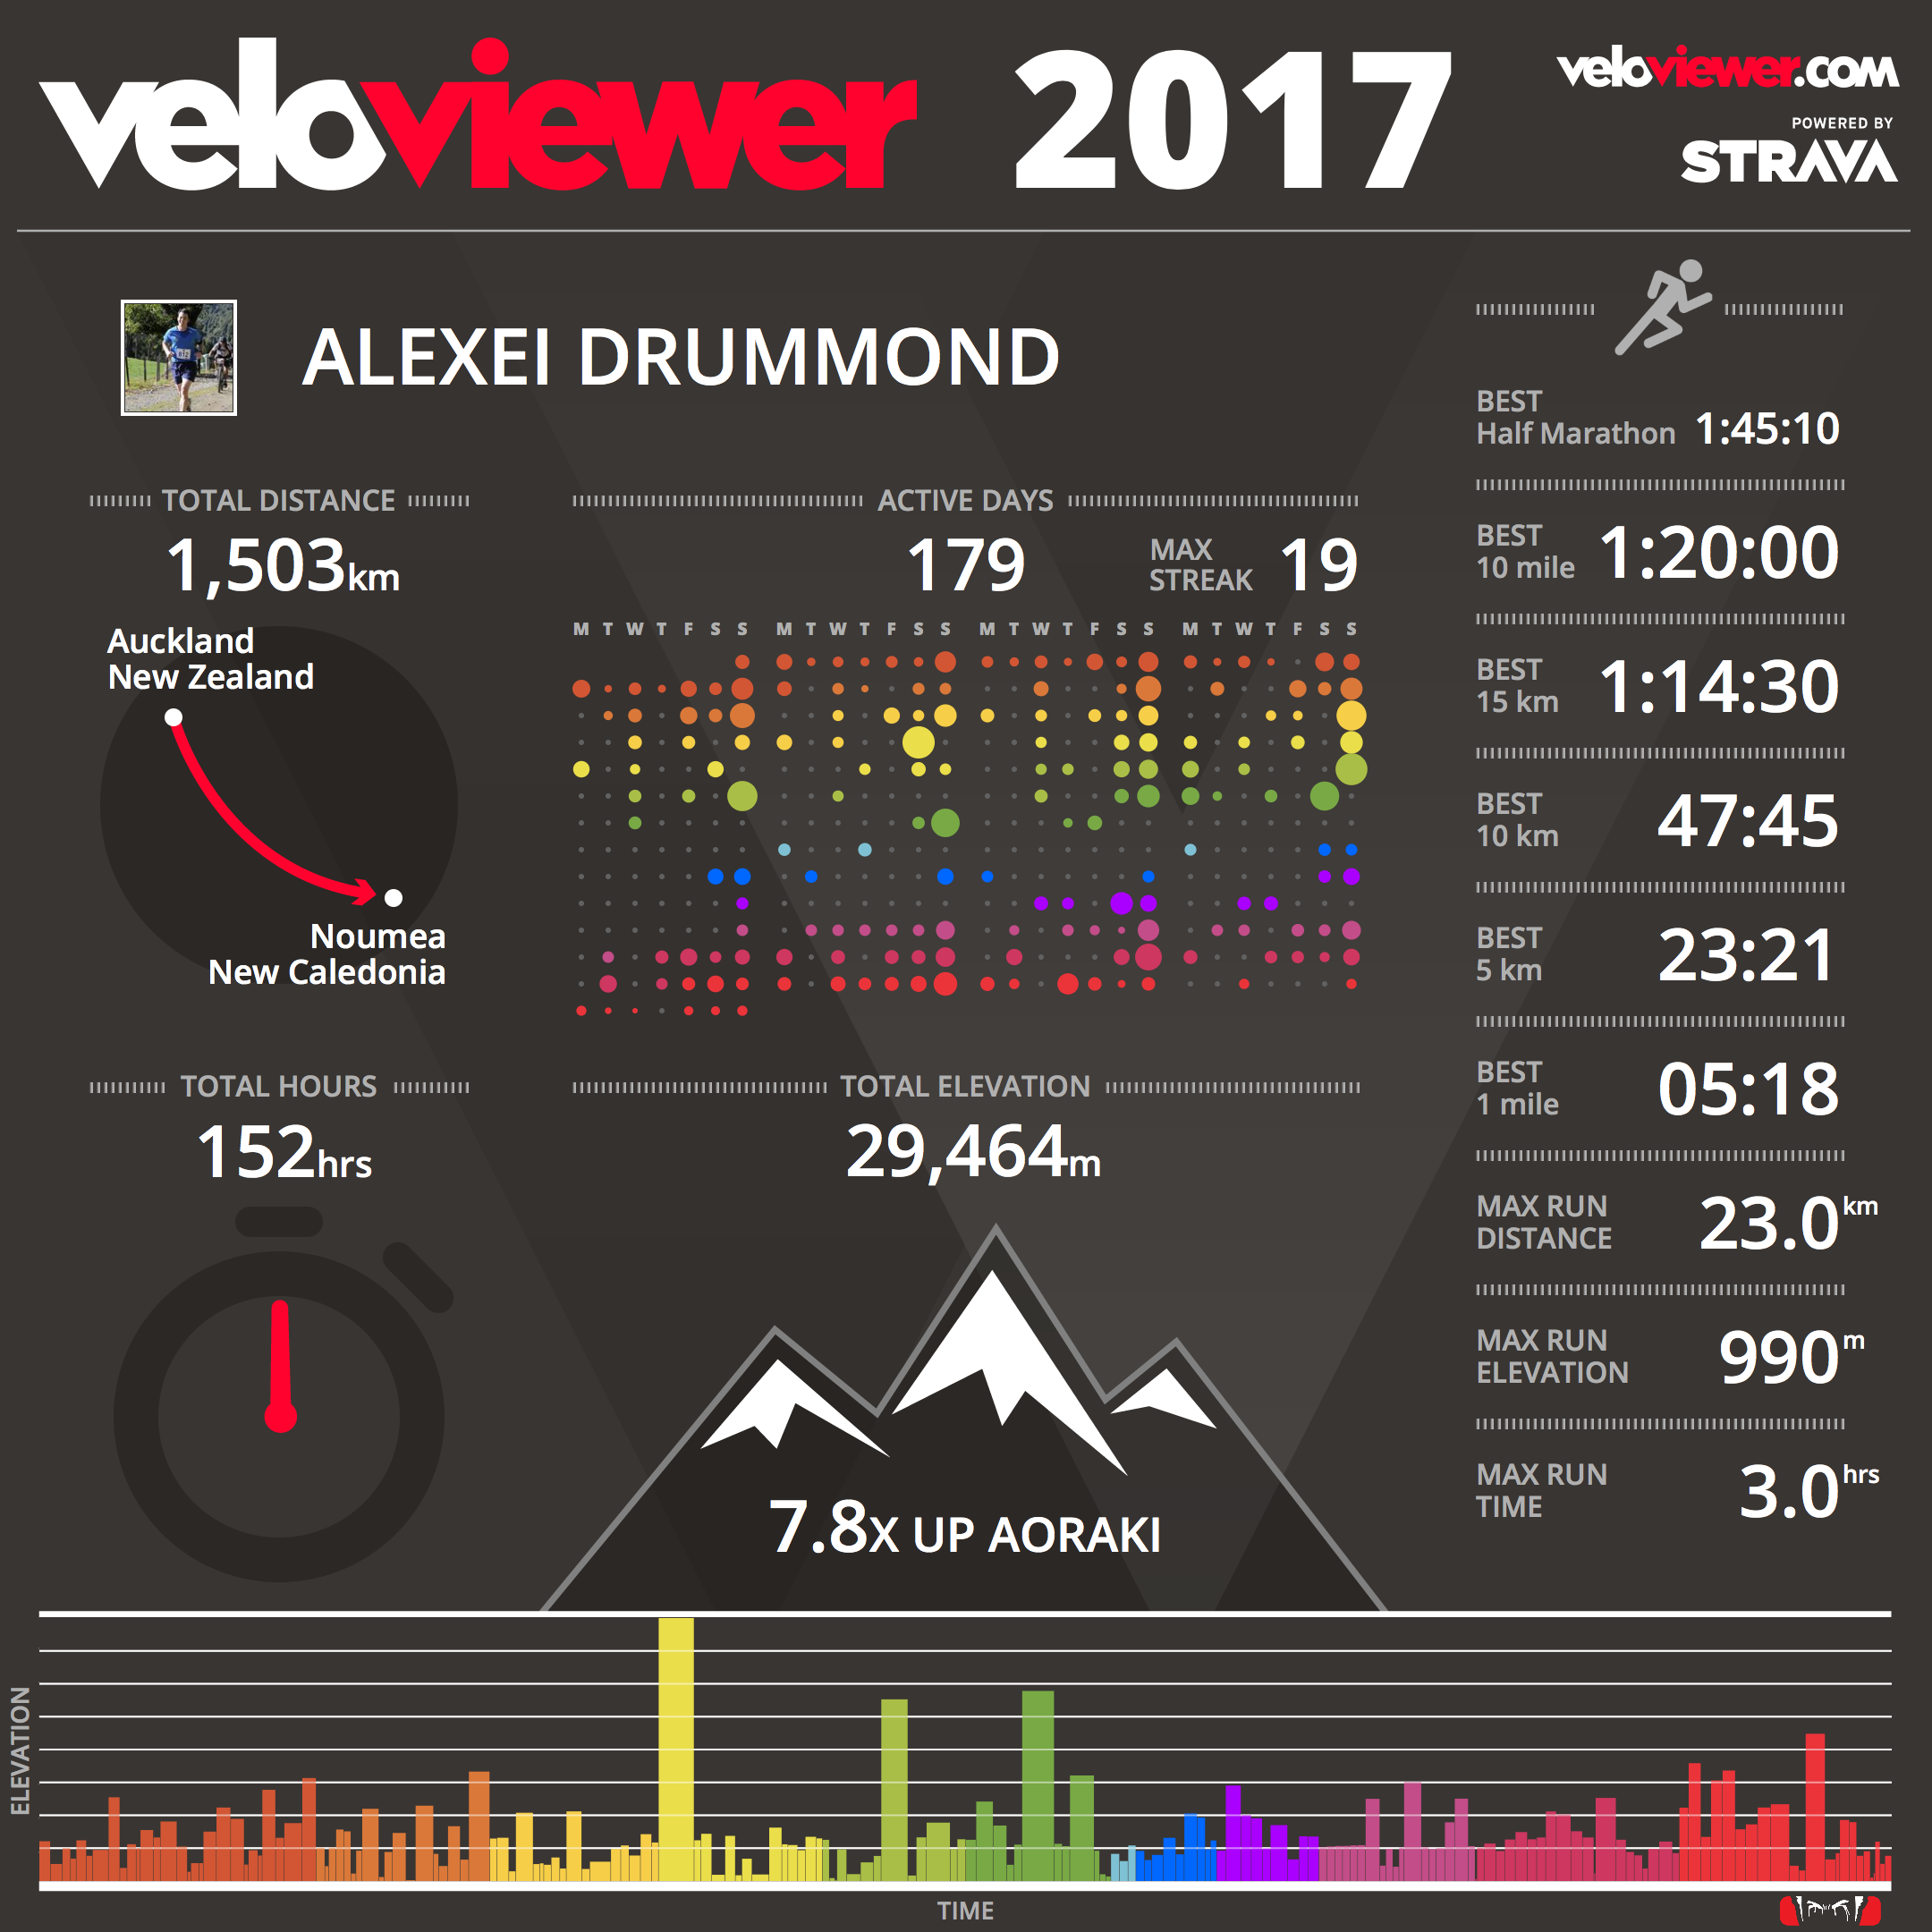 An infographic summary of my year of running in 2017.